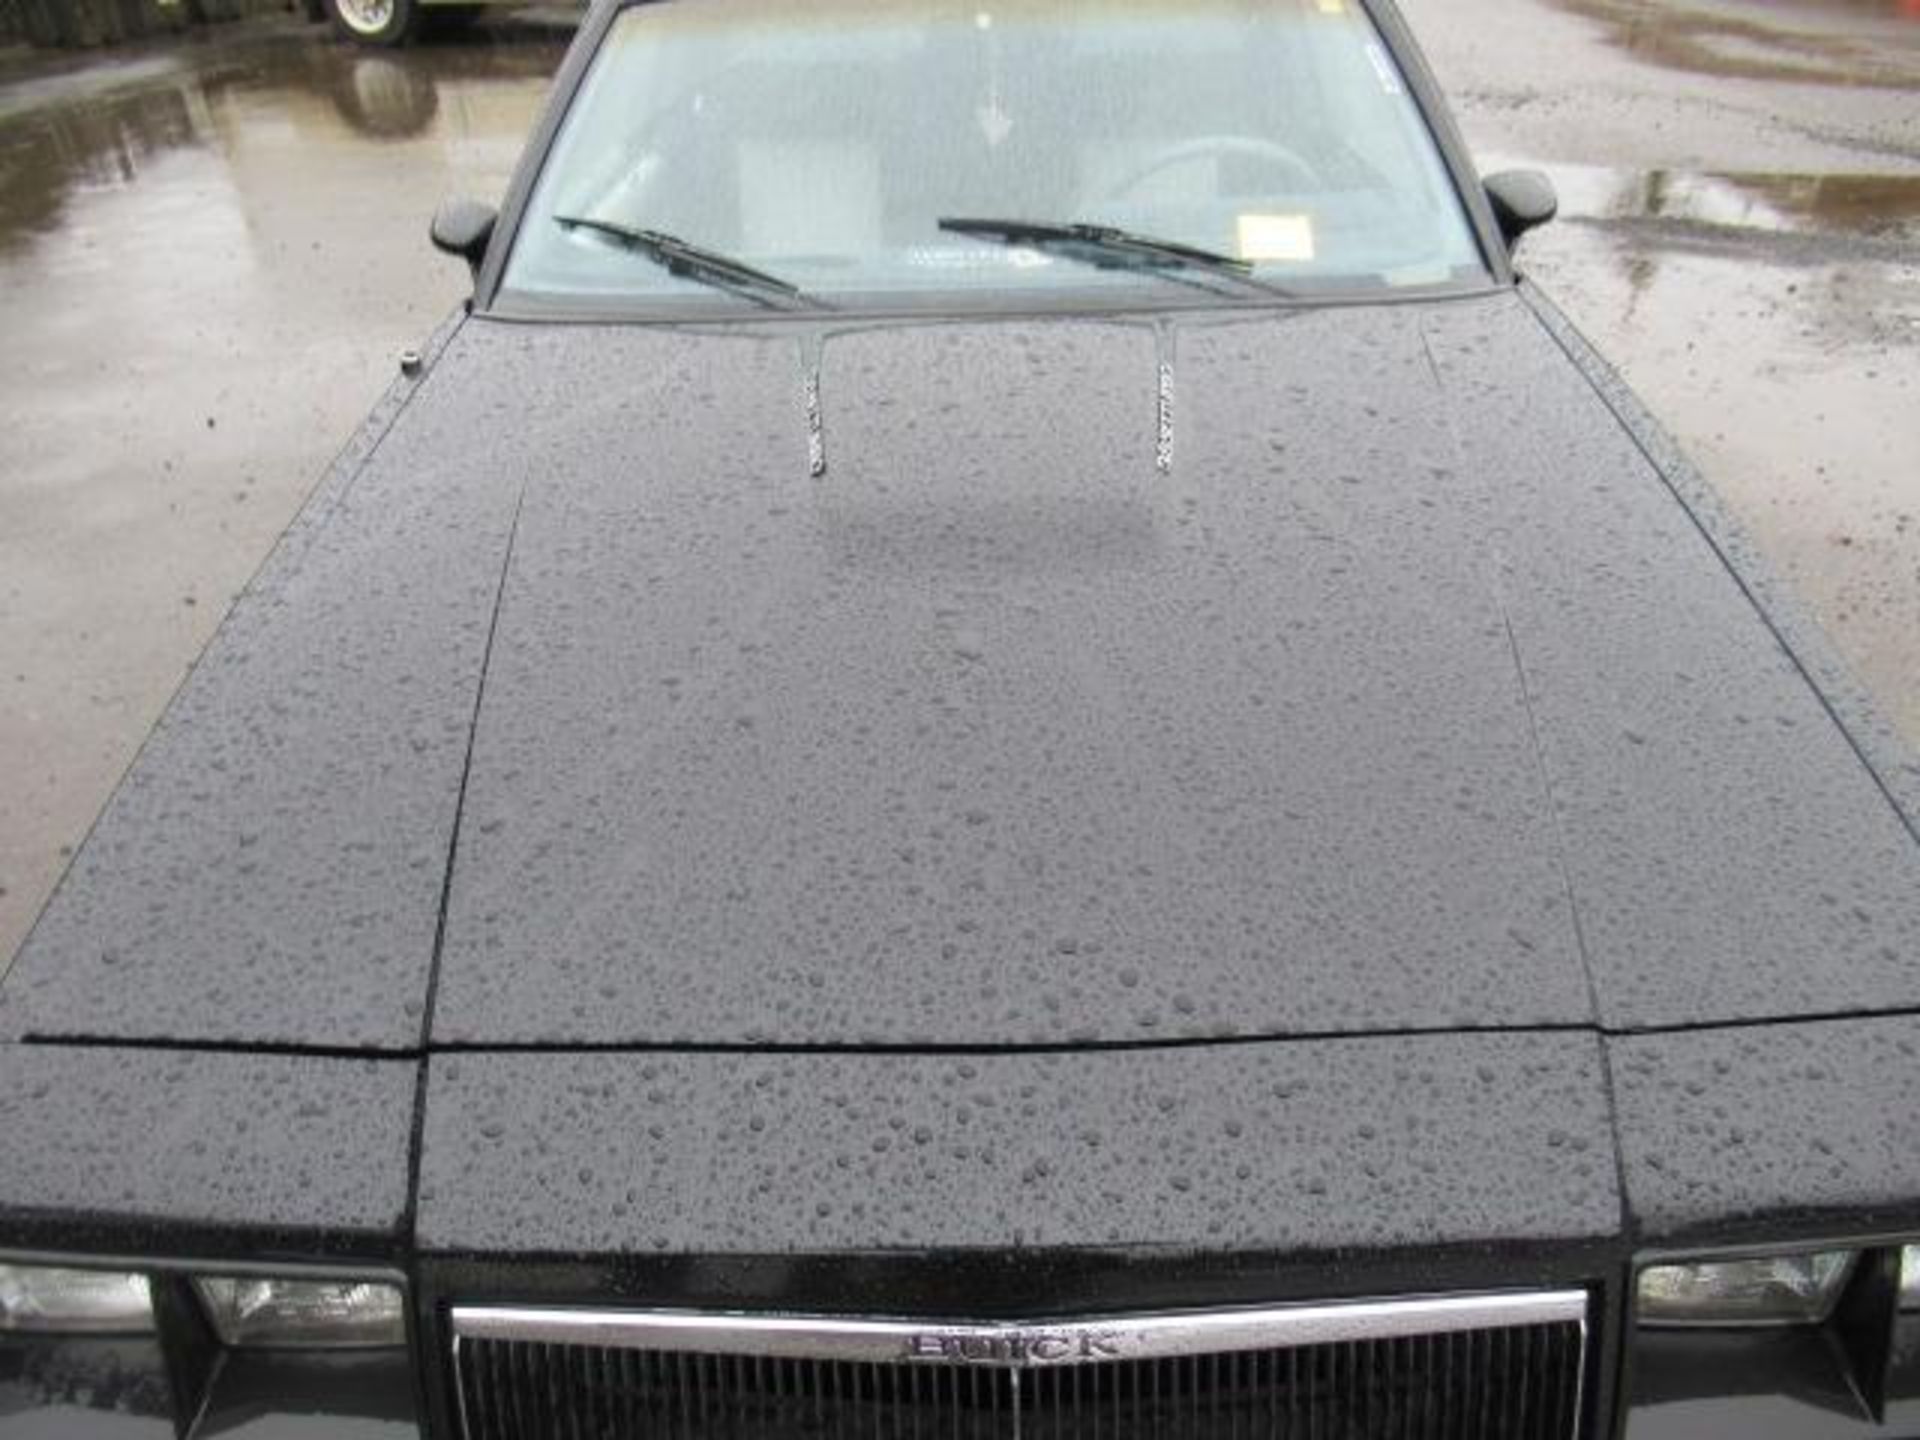 1986 BUICK GRAND NATIONAL - Image 14 of 30